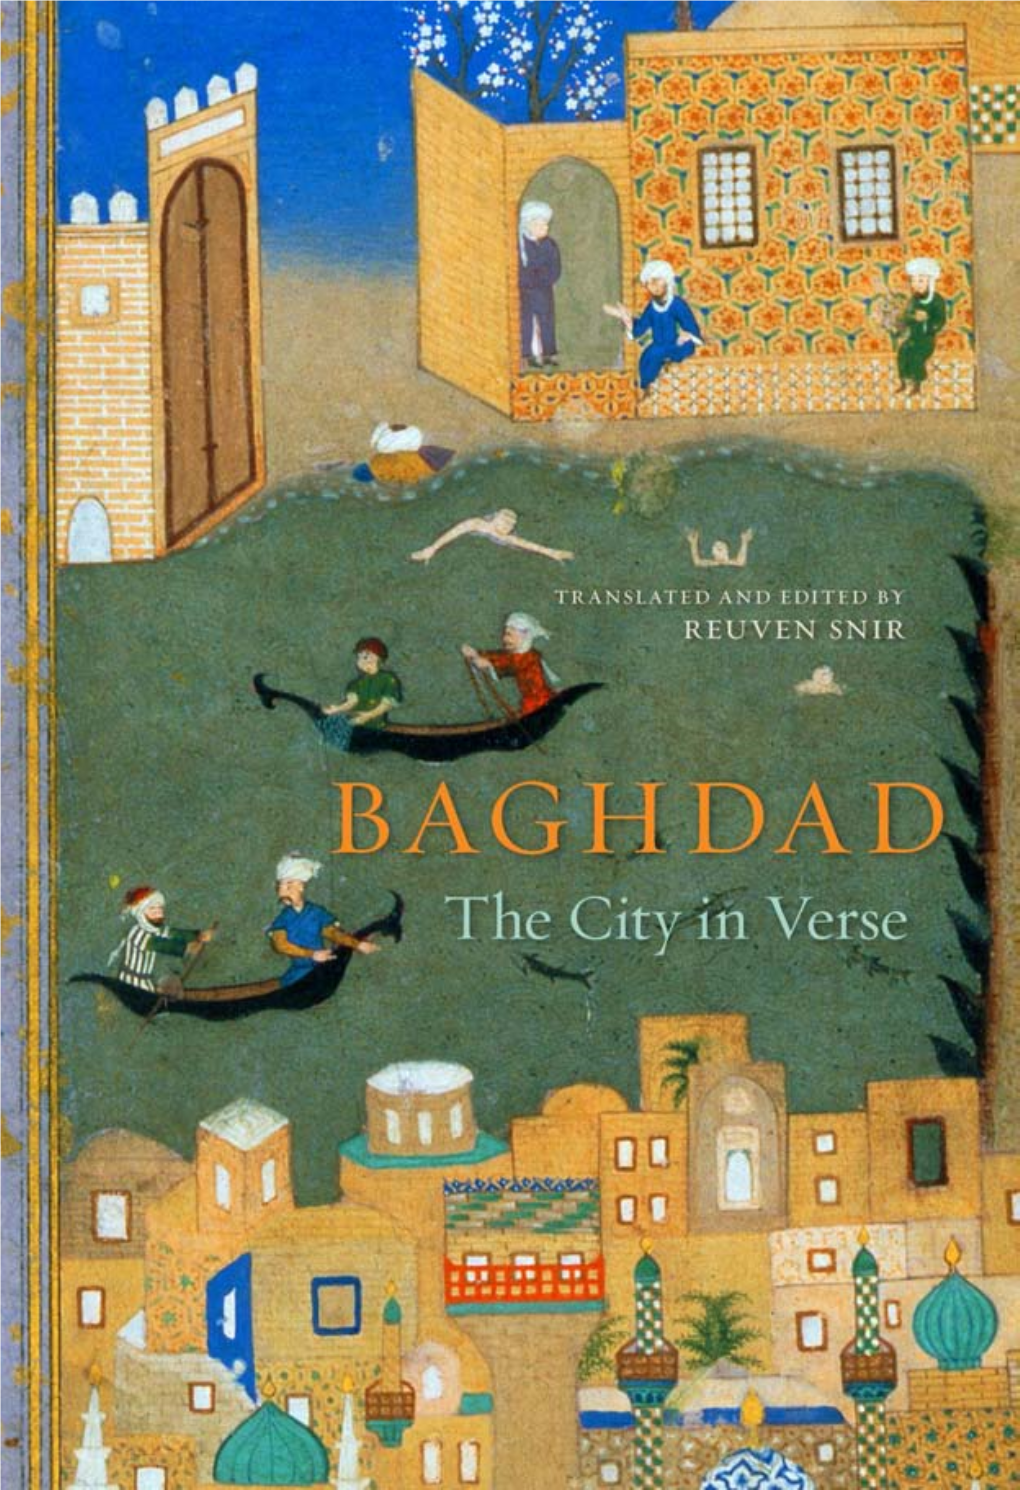 Baghdad : the City in Verse / Translated and Edited by Reuven Snir ; Foreword by Roger Allen ; Aft Erword by Abdul Kader El Janabi